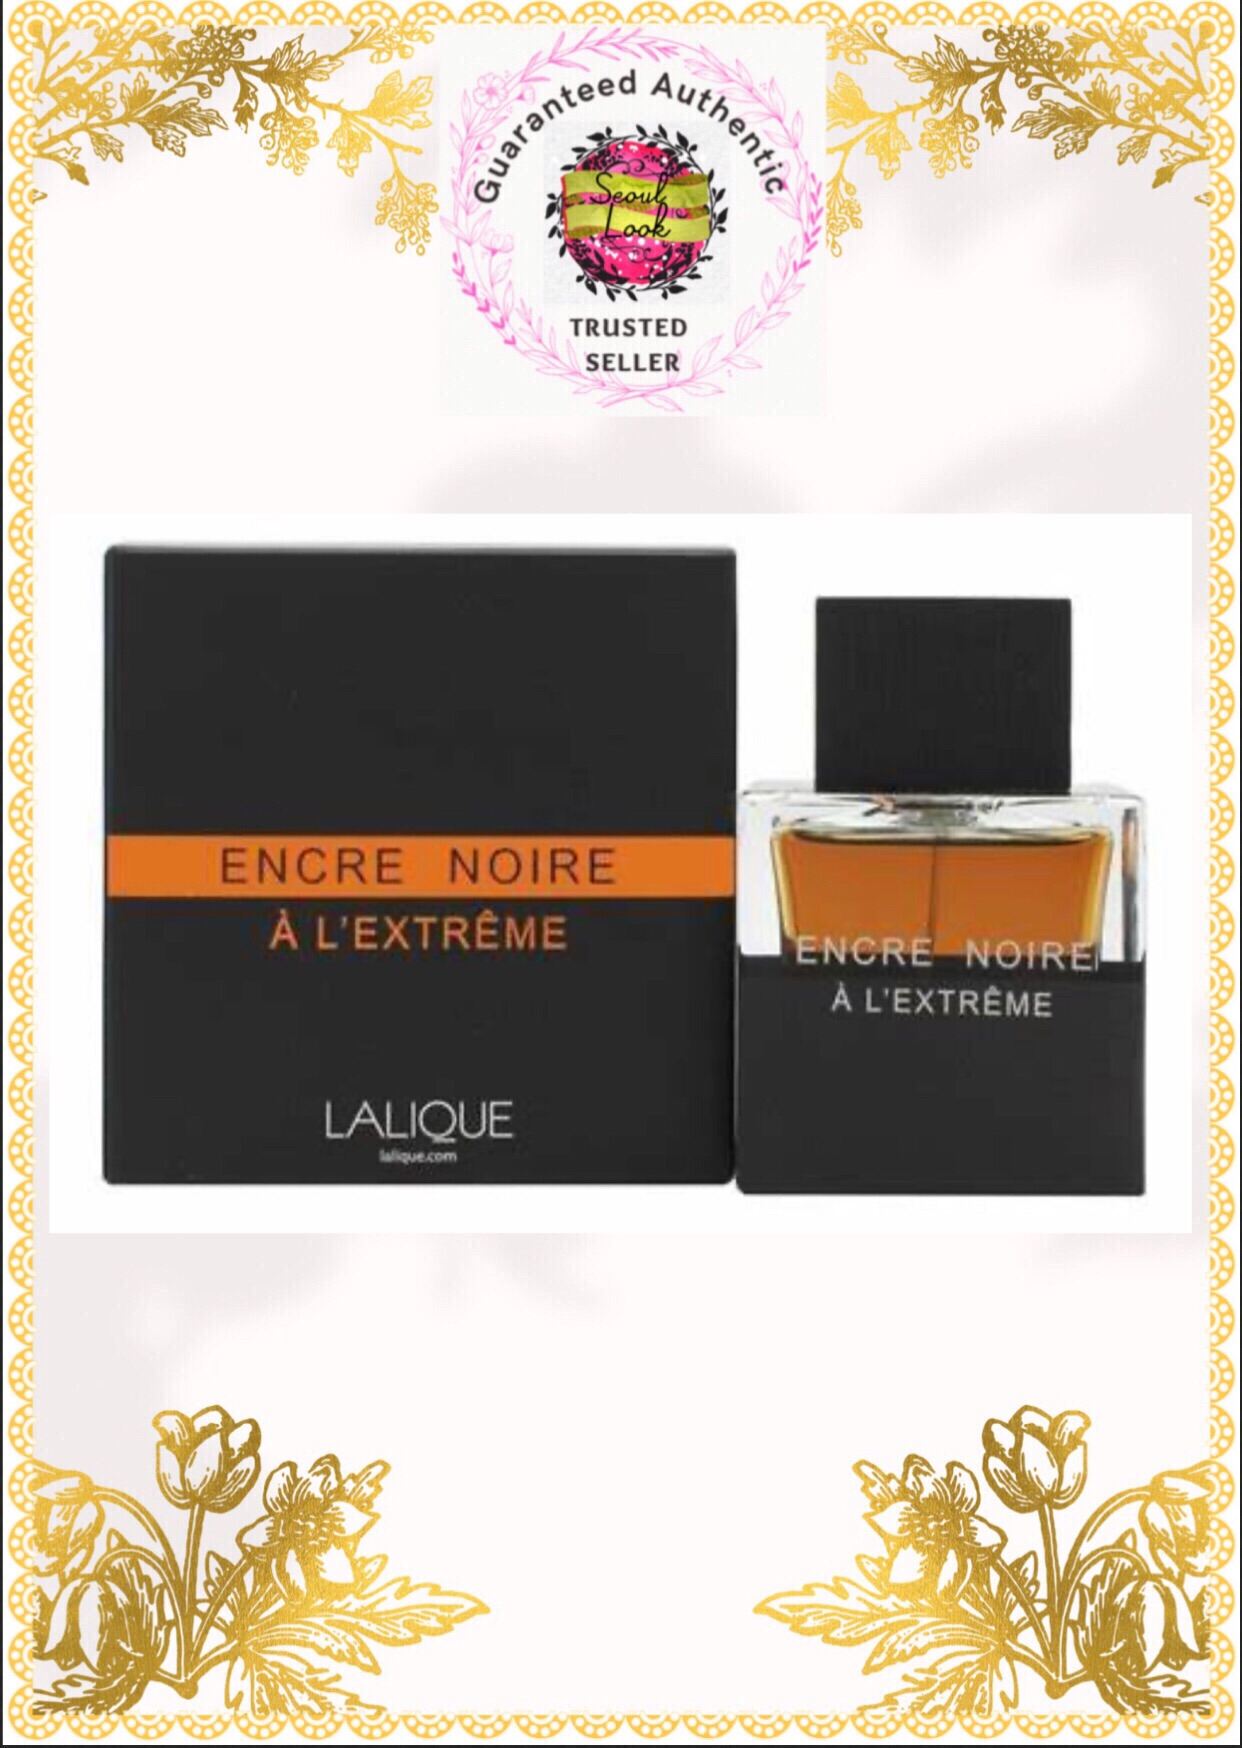 FLAVIA NOUVEAU AMBRE 3.4 EDP LV ” Ombre Nomade” inspired – Best Brands  Perfume